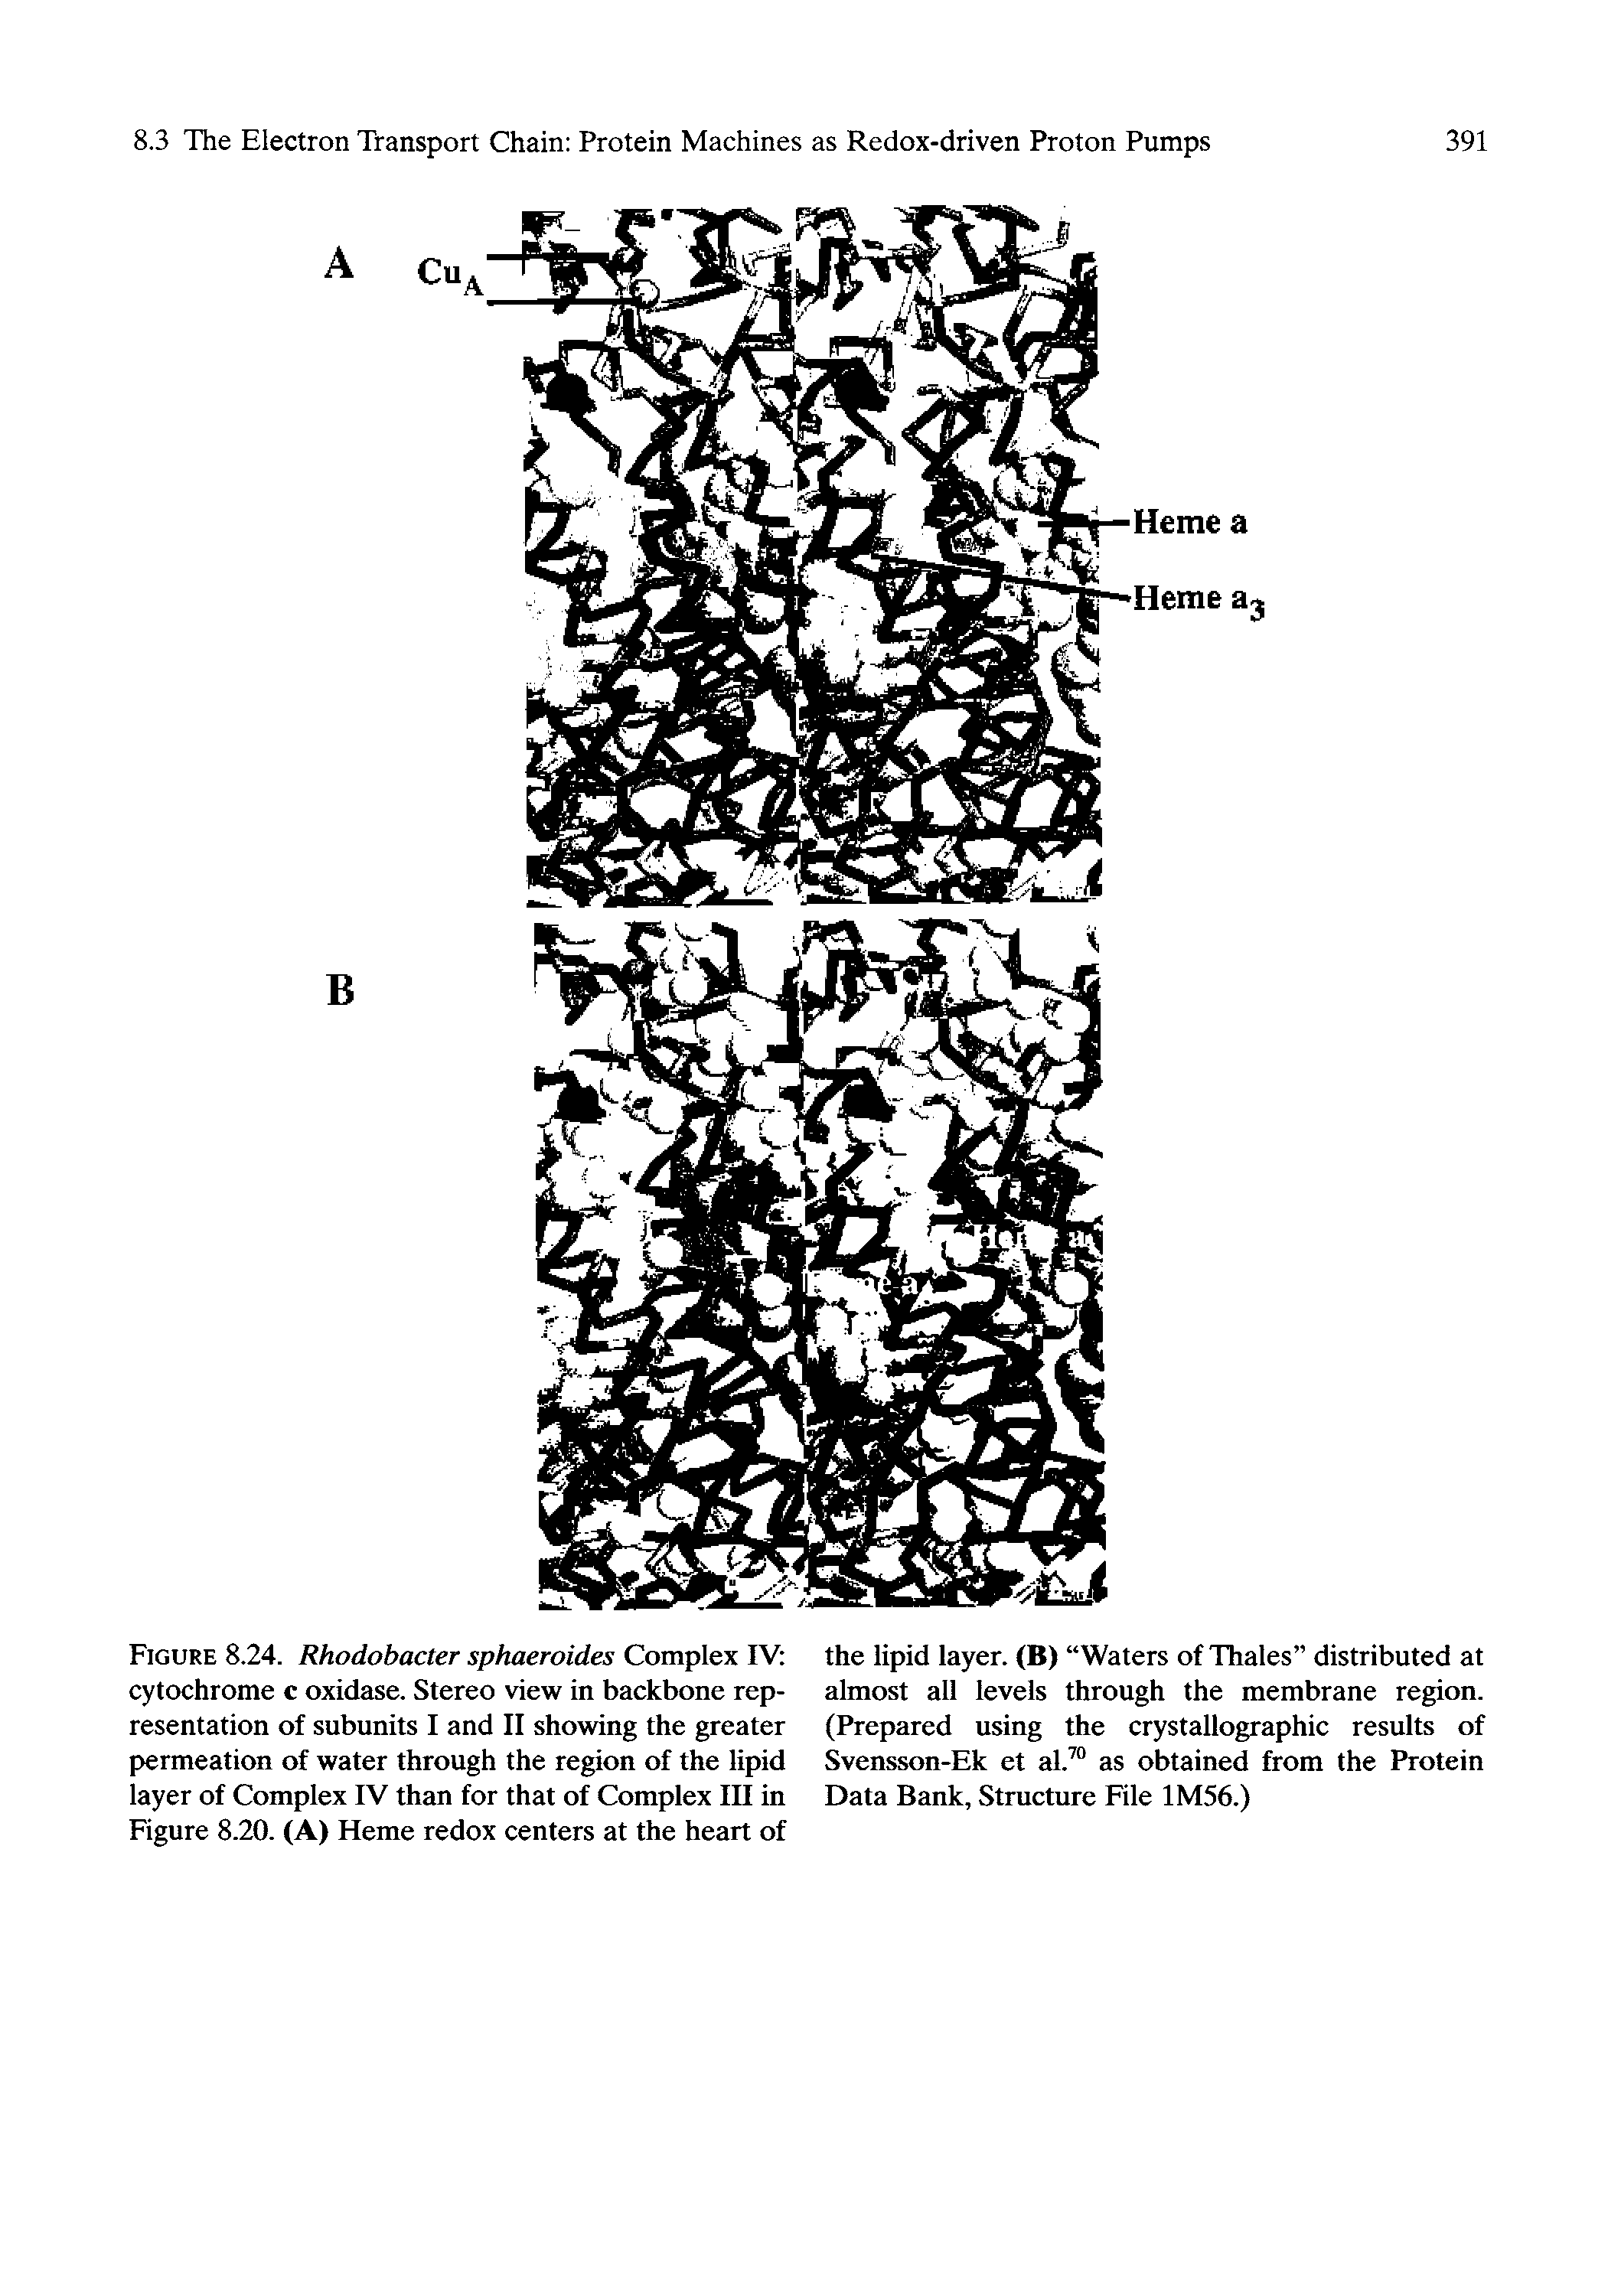 Figure 8.24. Rhodobacter sphaeroides Complex IV cytochrome c oxidase. Stereo view in backbone representation of subunits I and II showing the greater permeation of water through the region of the lipid layer of Complex IV than for that of Complex III in Figure 8.20. (A) Heme redox centers at the heart of...